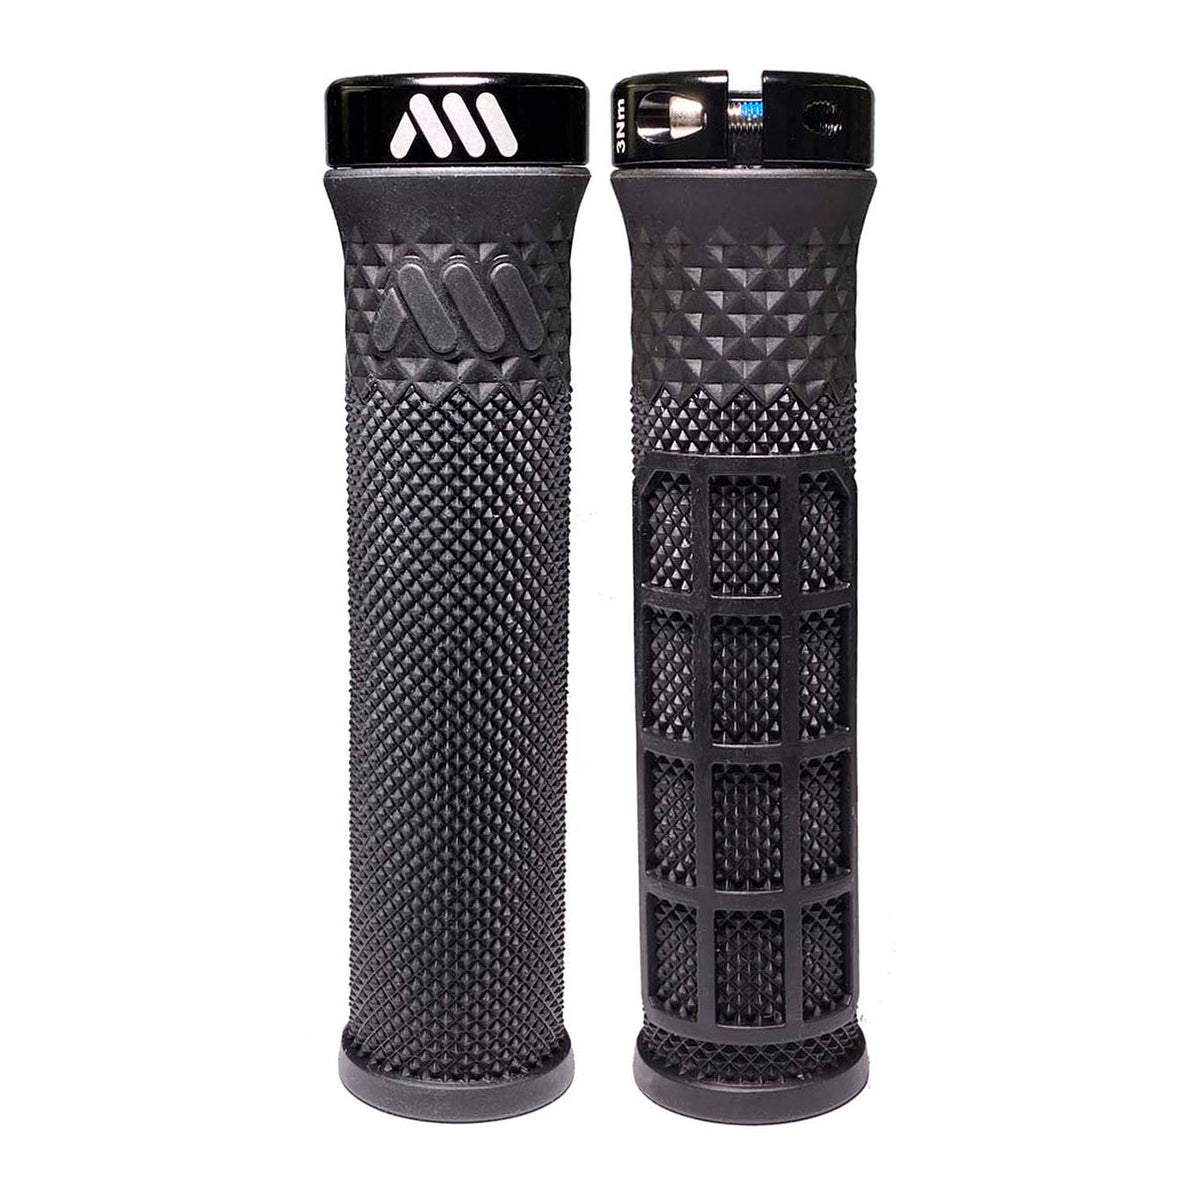 All Mountain Style Cero Single Clamp Lock On Grips - Black